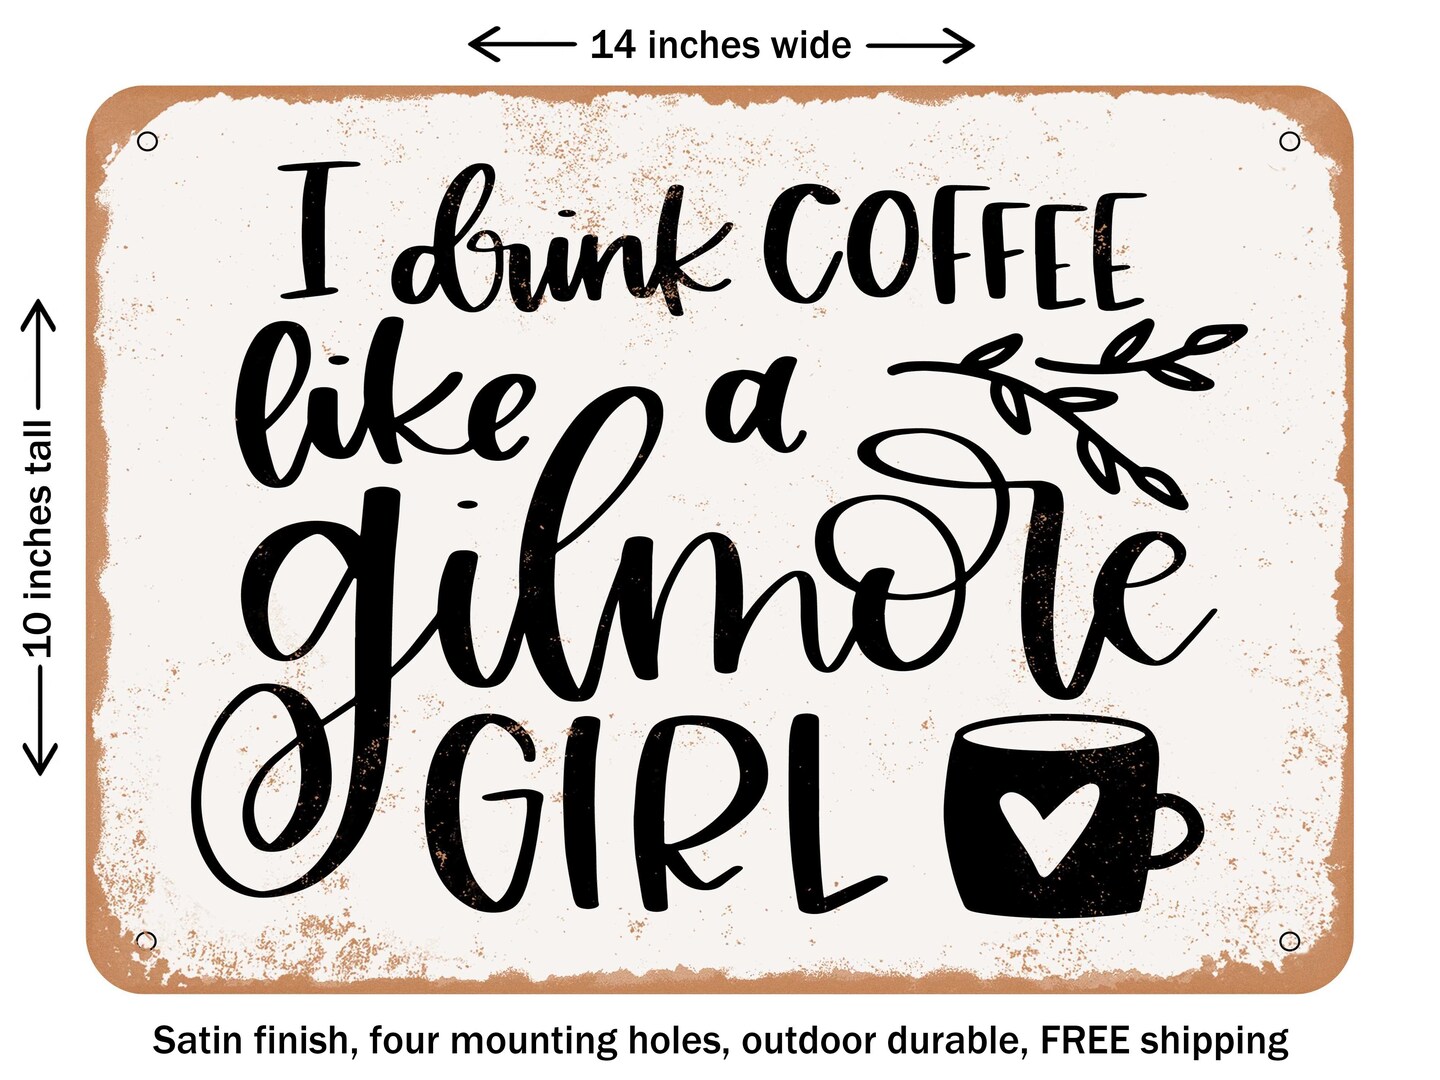 DECORATIVE METAL SIGN - Drink Like a Gilmore Girl - Vintage Rusty Look